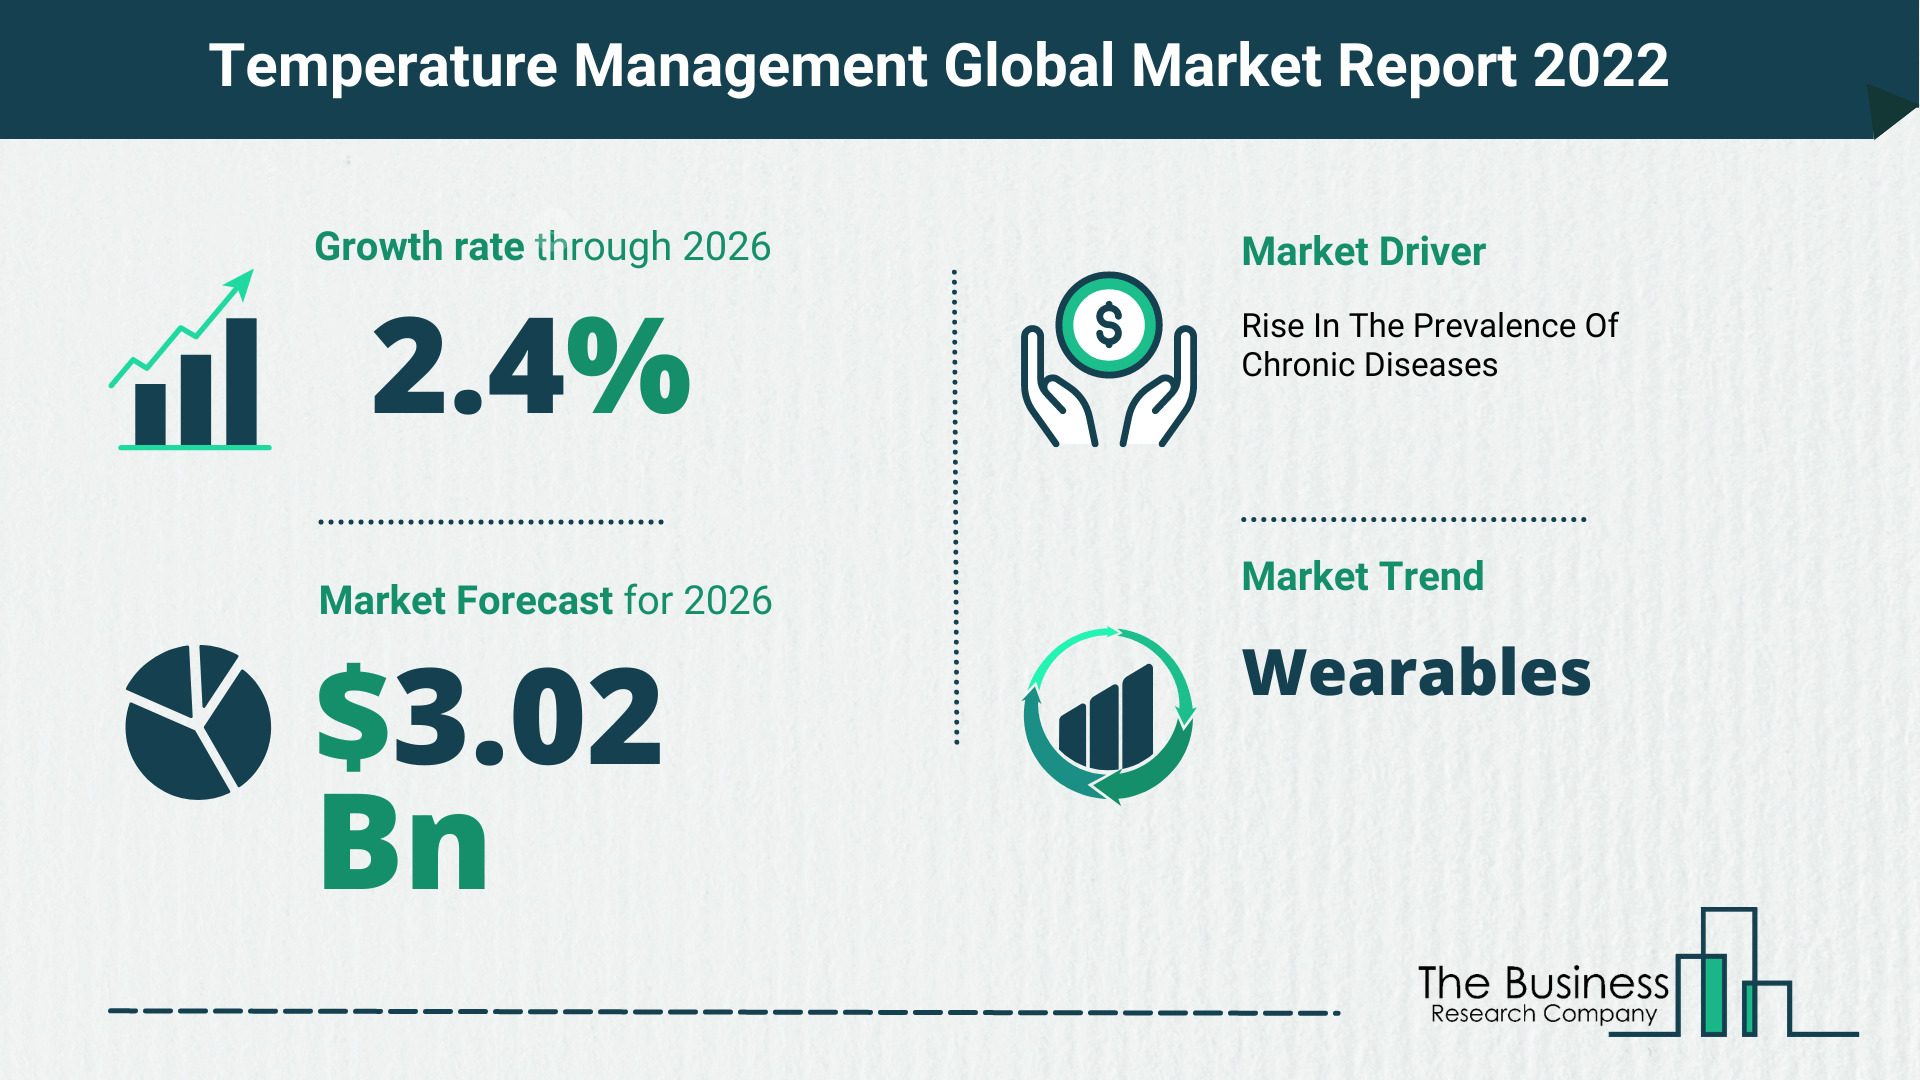 How Will The Temperature Management Market Grow In 2022?